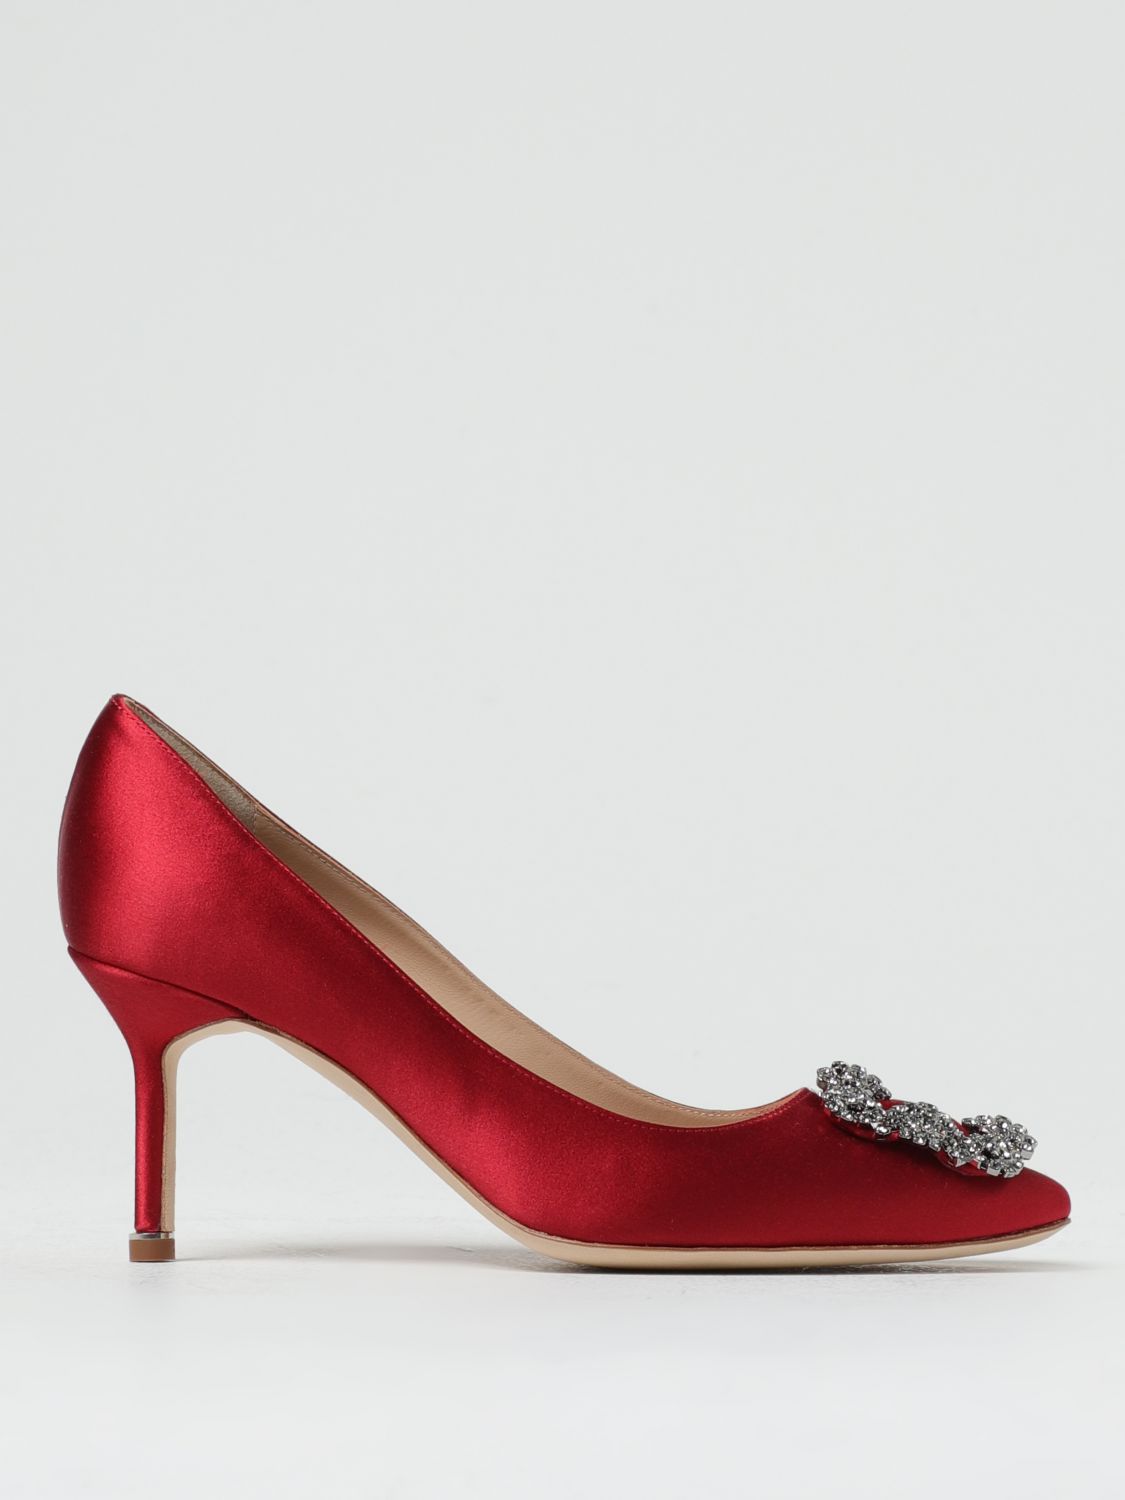 Manolo Blahnik Hangisi Pumps In Satin With Jewel Buckle In Ruby